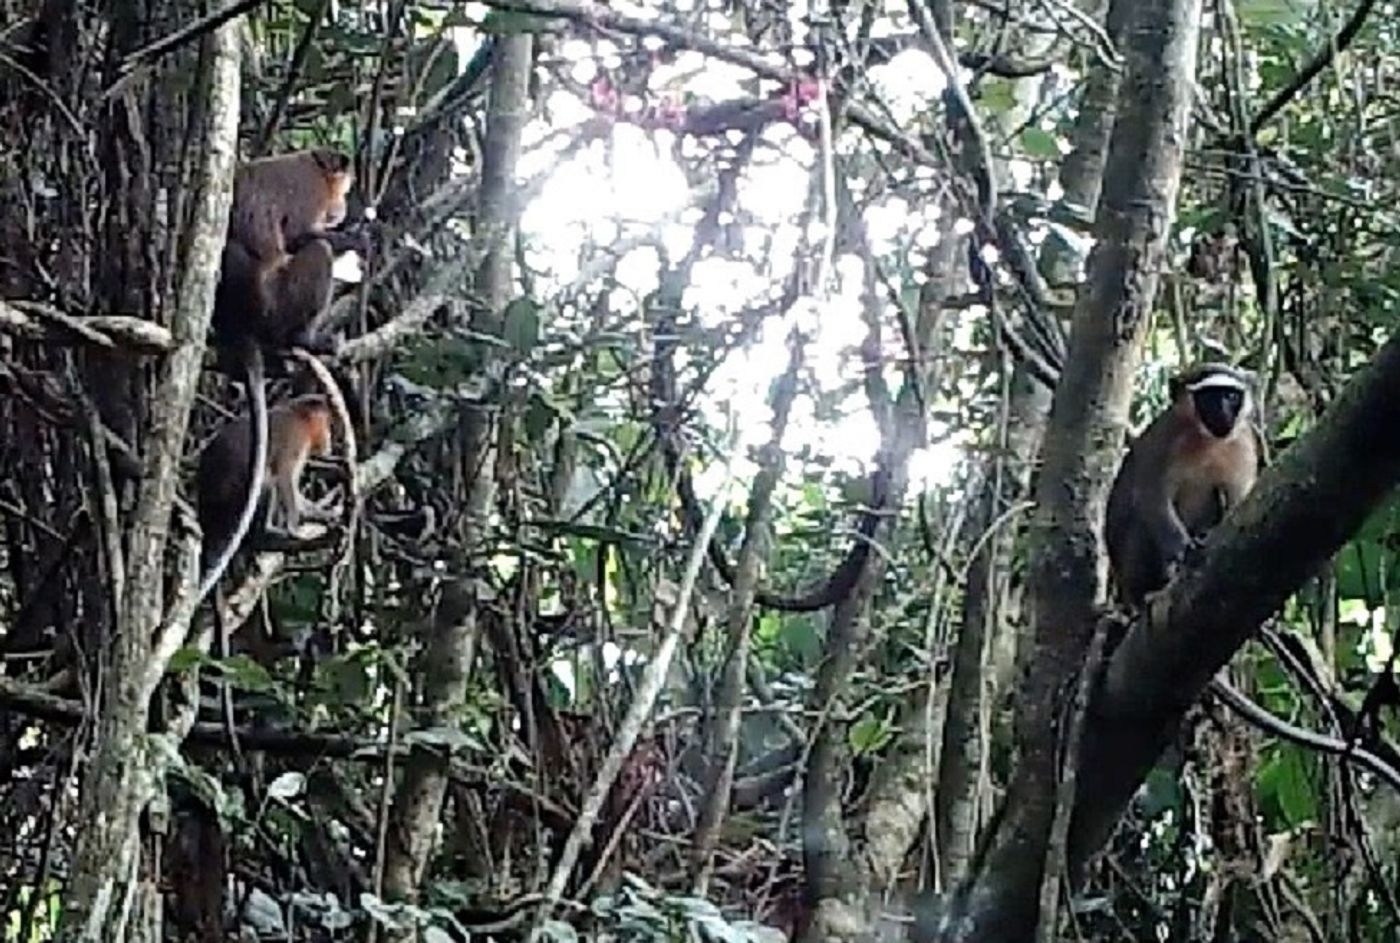 The Dryas Monkey was captured in rare footage thanks to a project being conducted in the Democratic Republic of Congo by Florida Atlantic University.